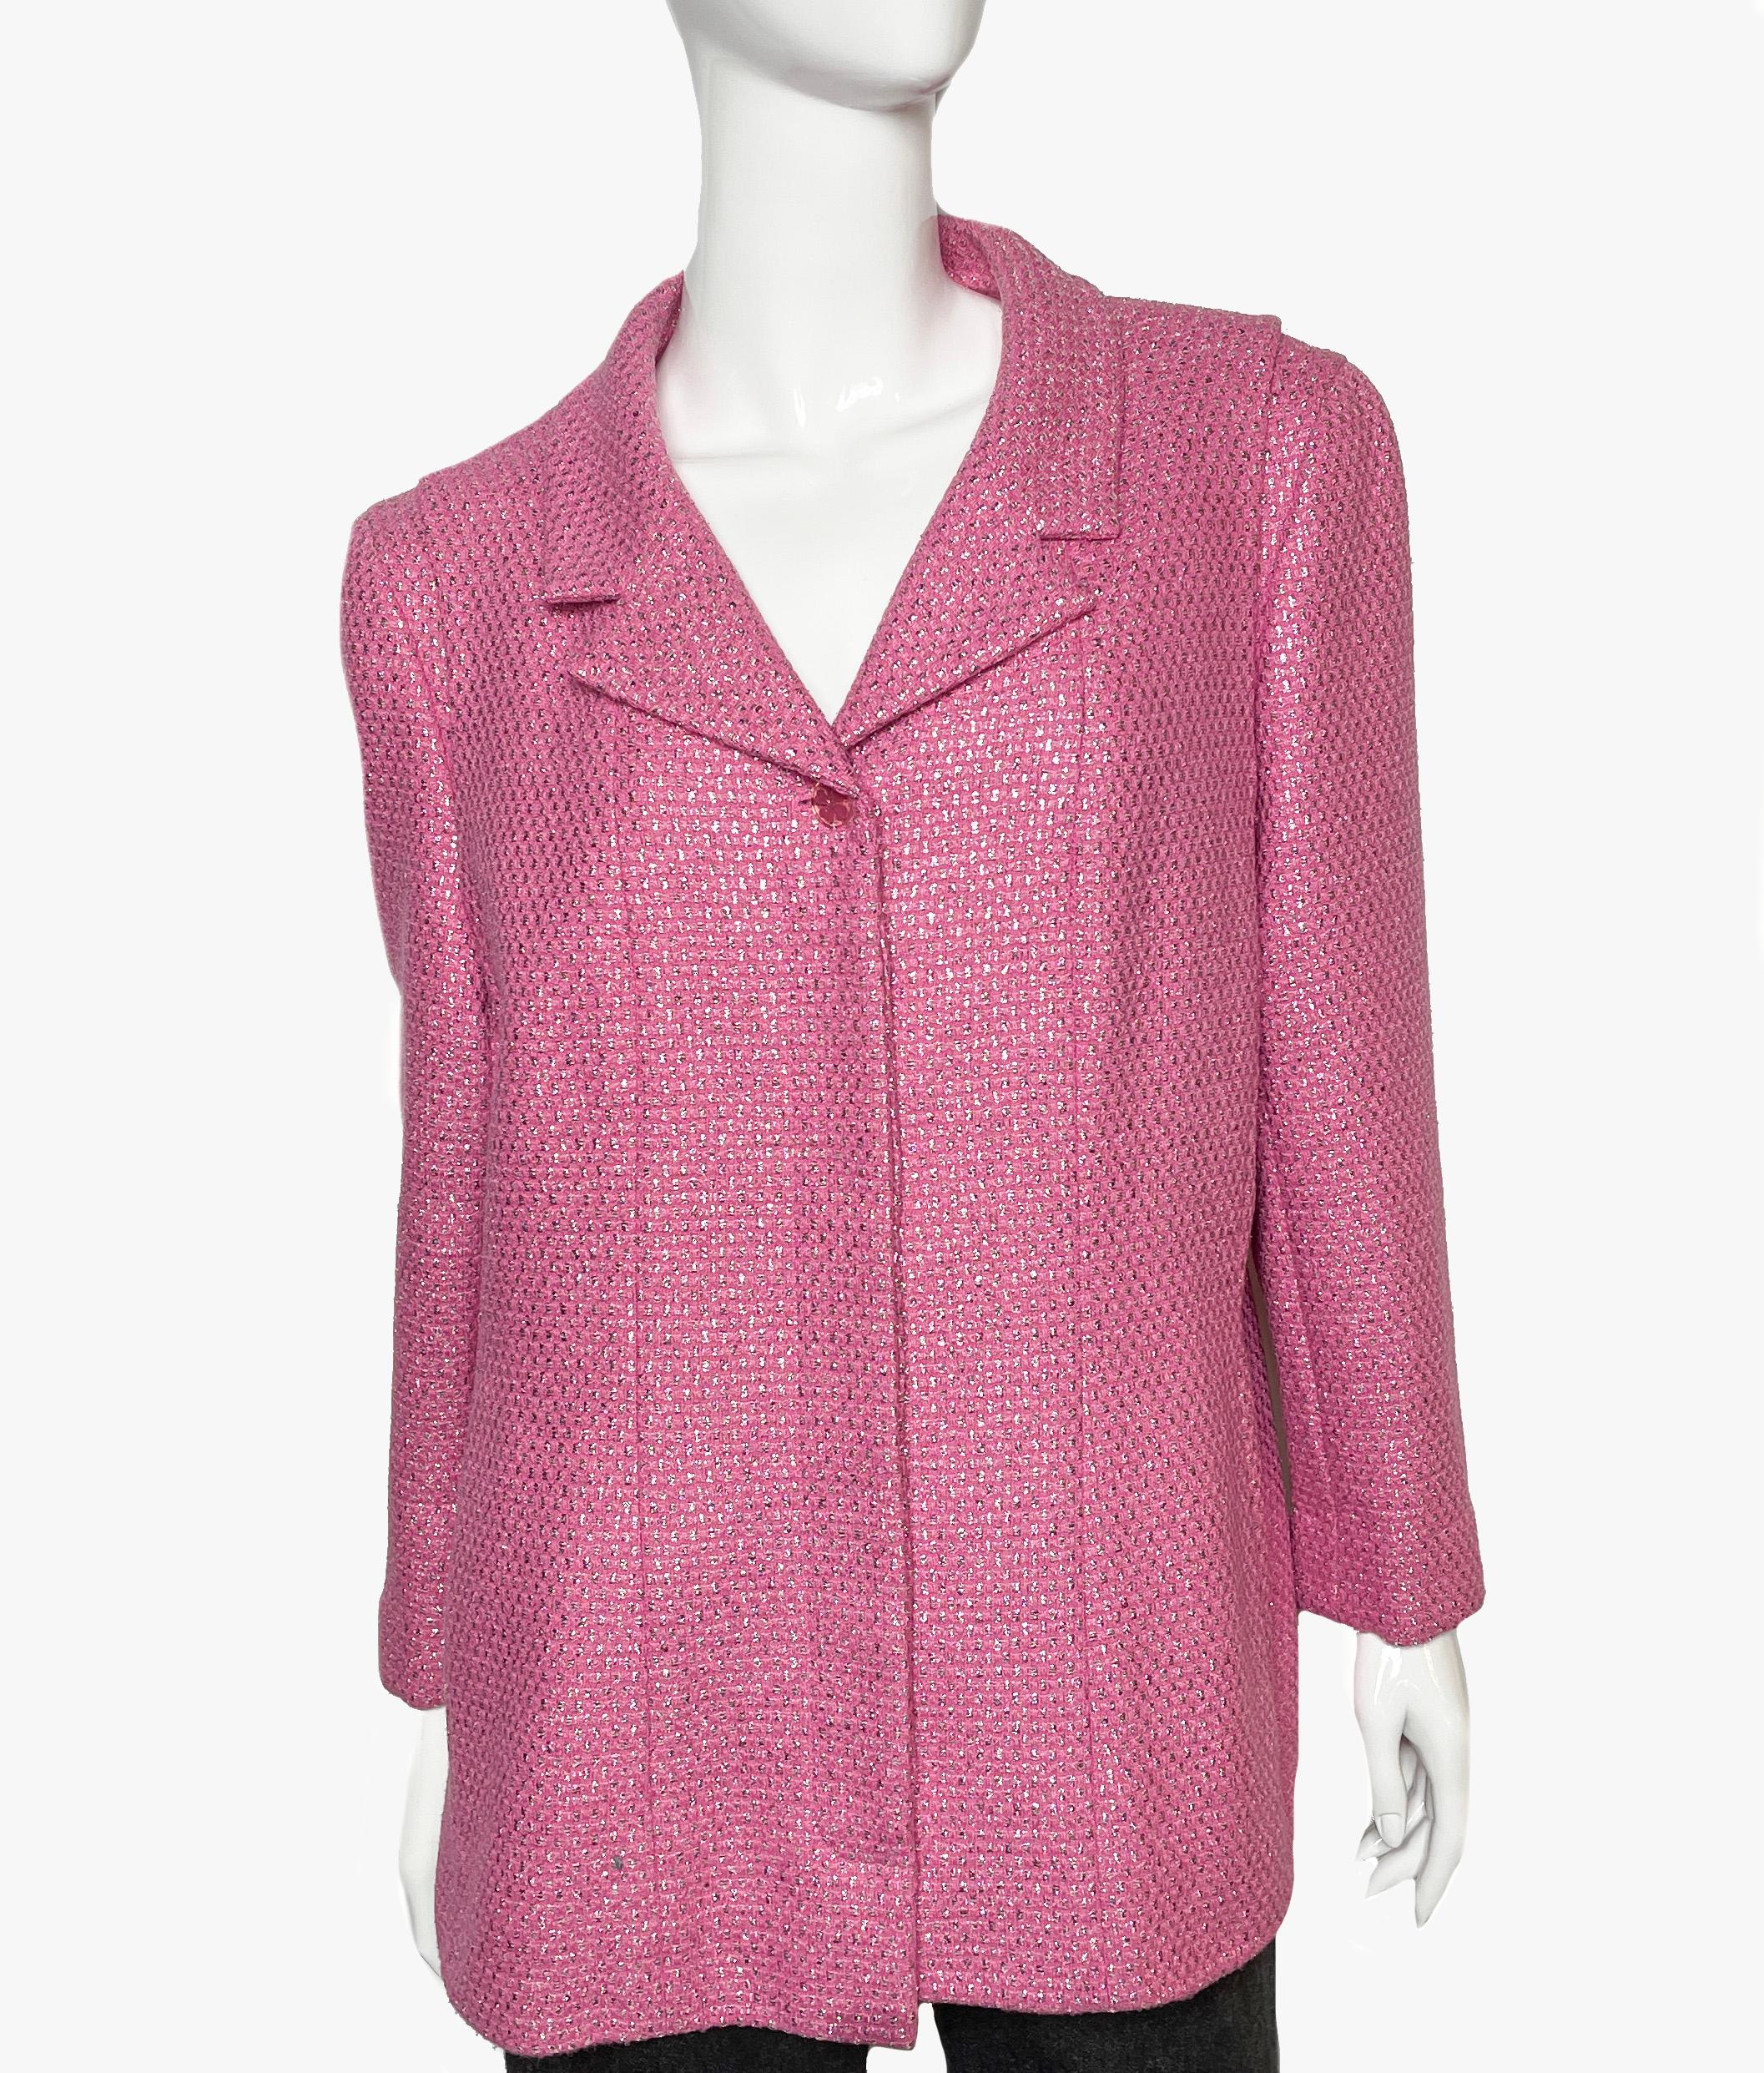 Chanel blazer from the Cruise 2001 collection by Karl Lagerfeld
Metallic & Pink color, tweed Pattern, pointed collar, slit Pockets & button closure

Fabric: 39% Wool, 29% Silk, 20% Polyester, 12% Polyamide; Lining 100% Silk

Size: XL / US14,